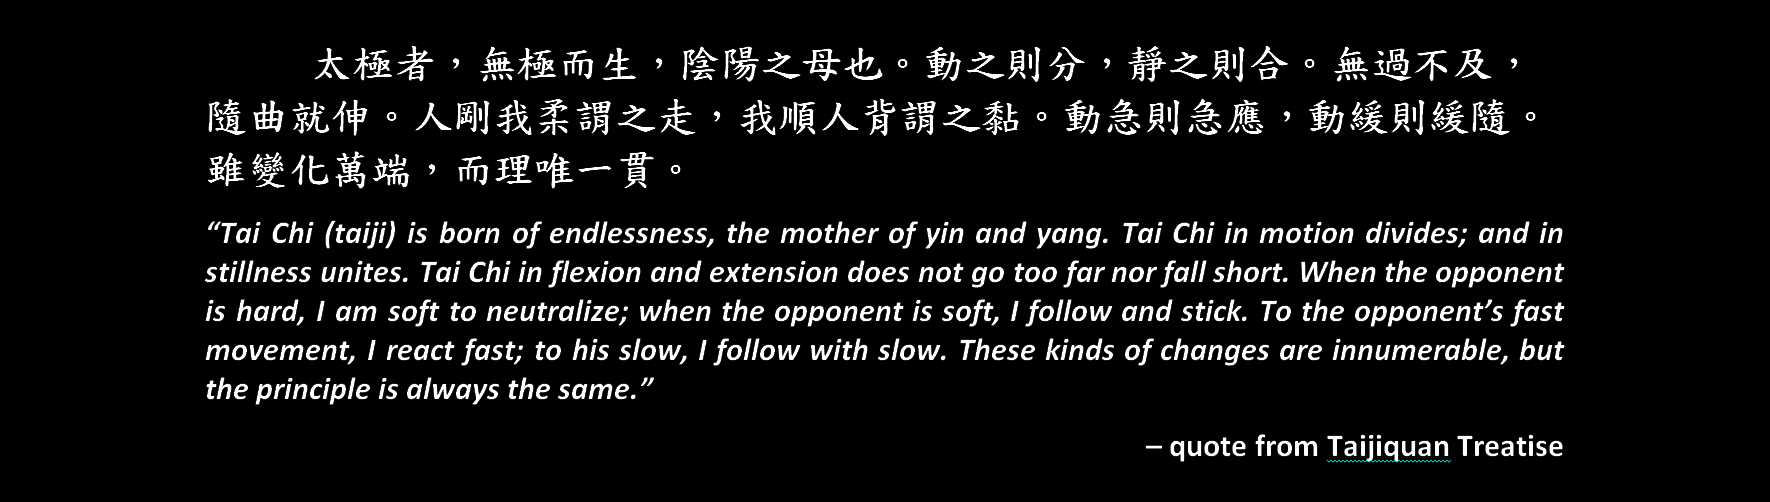 The Taijiquan Treatise Explained: Part 1 of 3 (太極拳論-1)